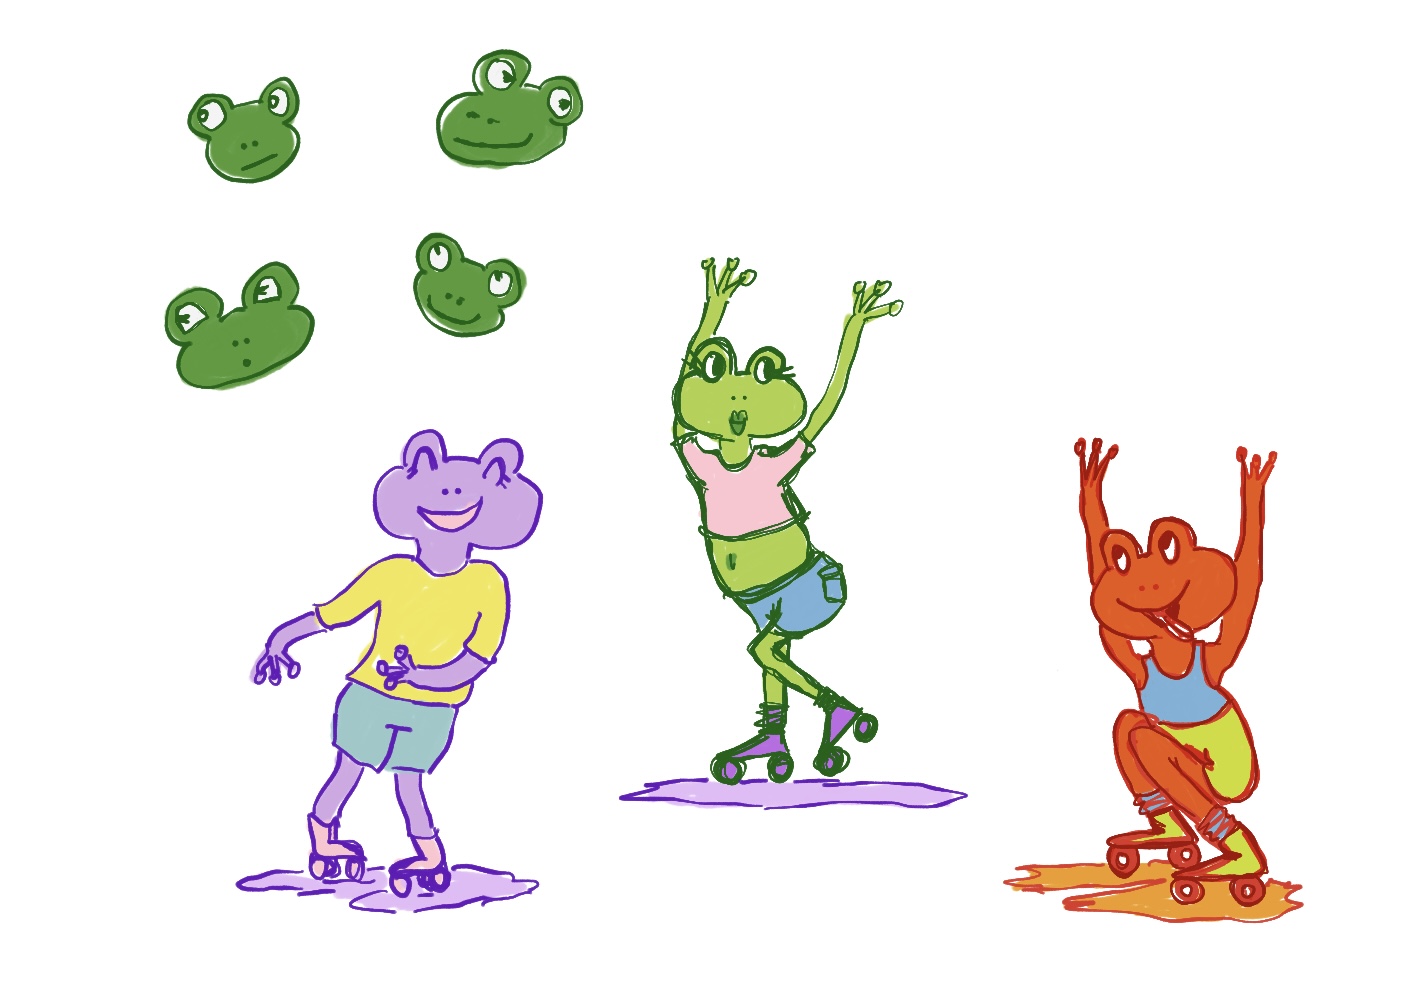 Frog friends roller skating, illustrated by Coco Poley